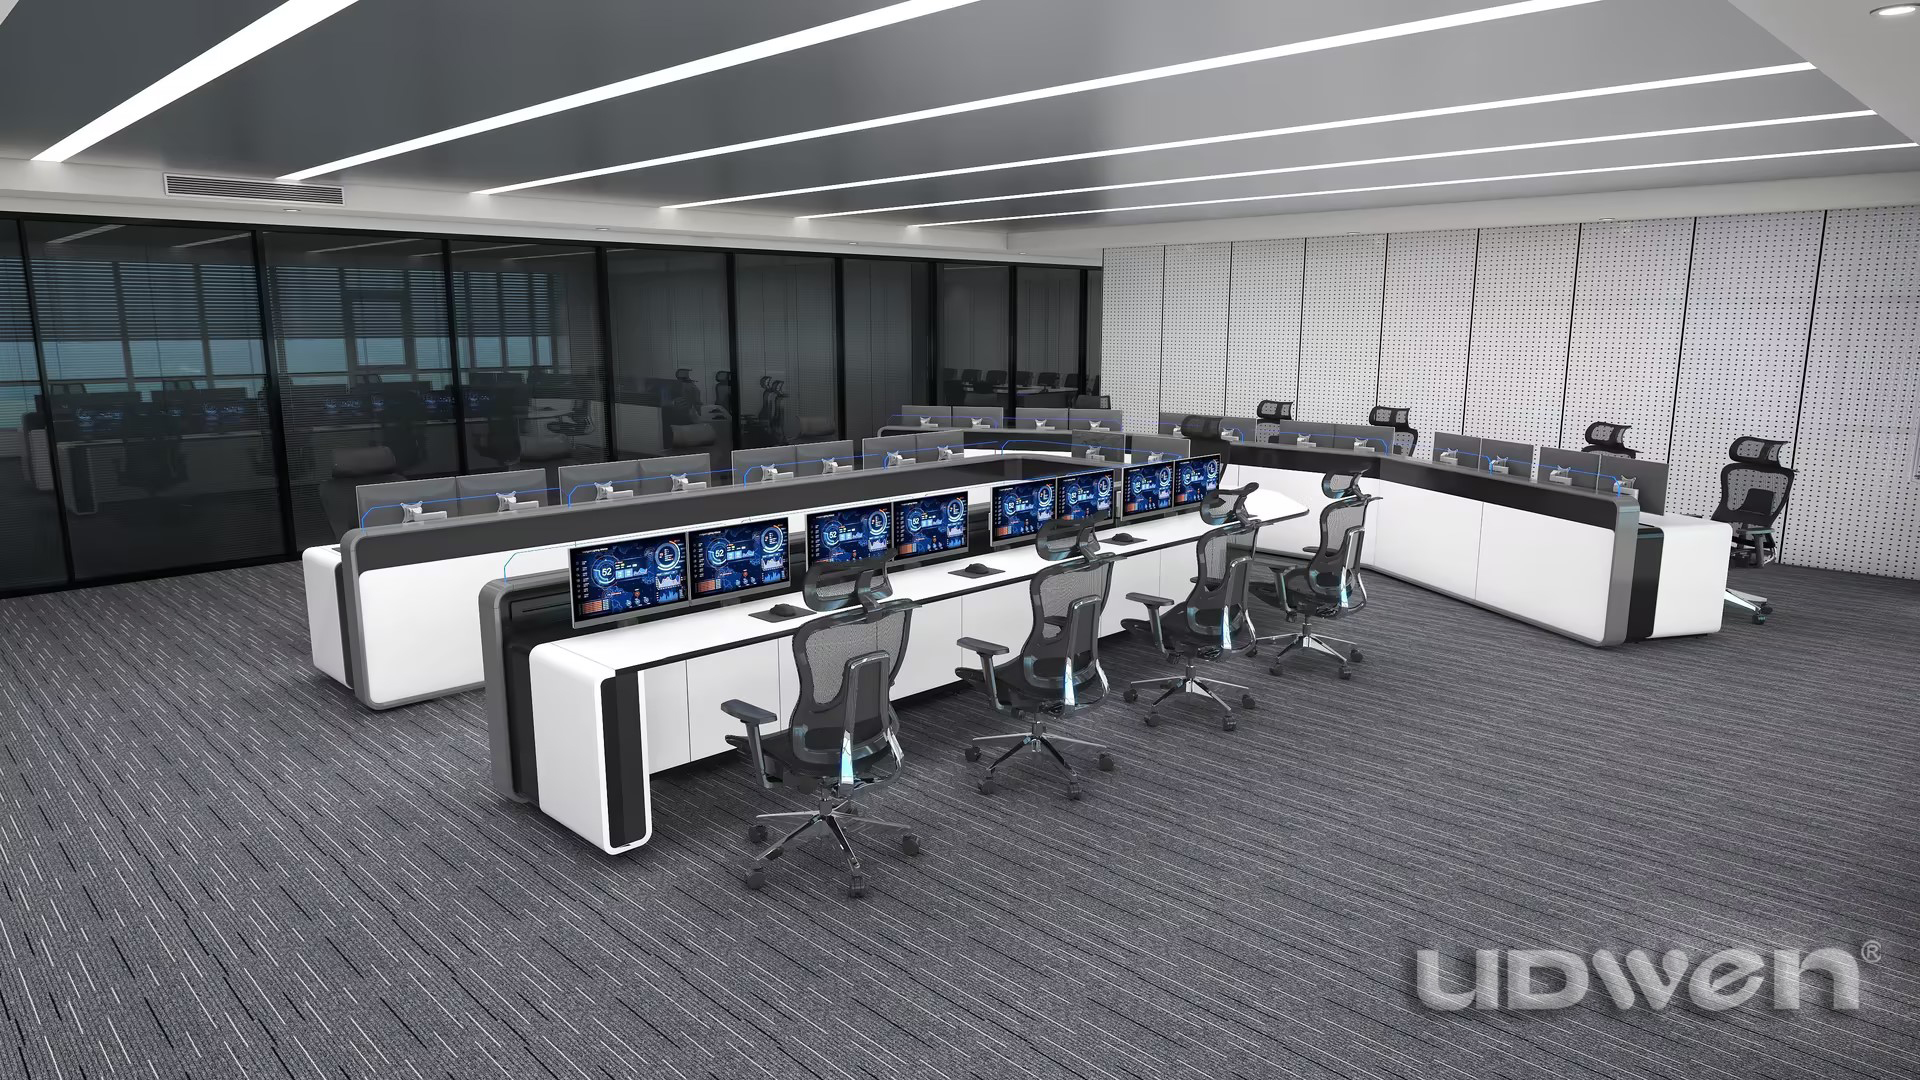 From Design to Practice: Engineering and Innovation of UDWEN Control Room Console